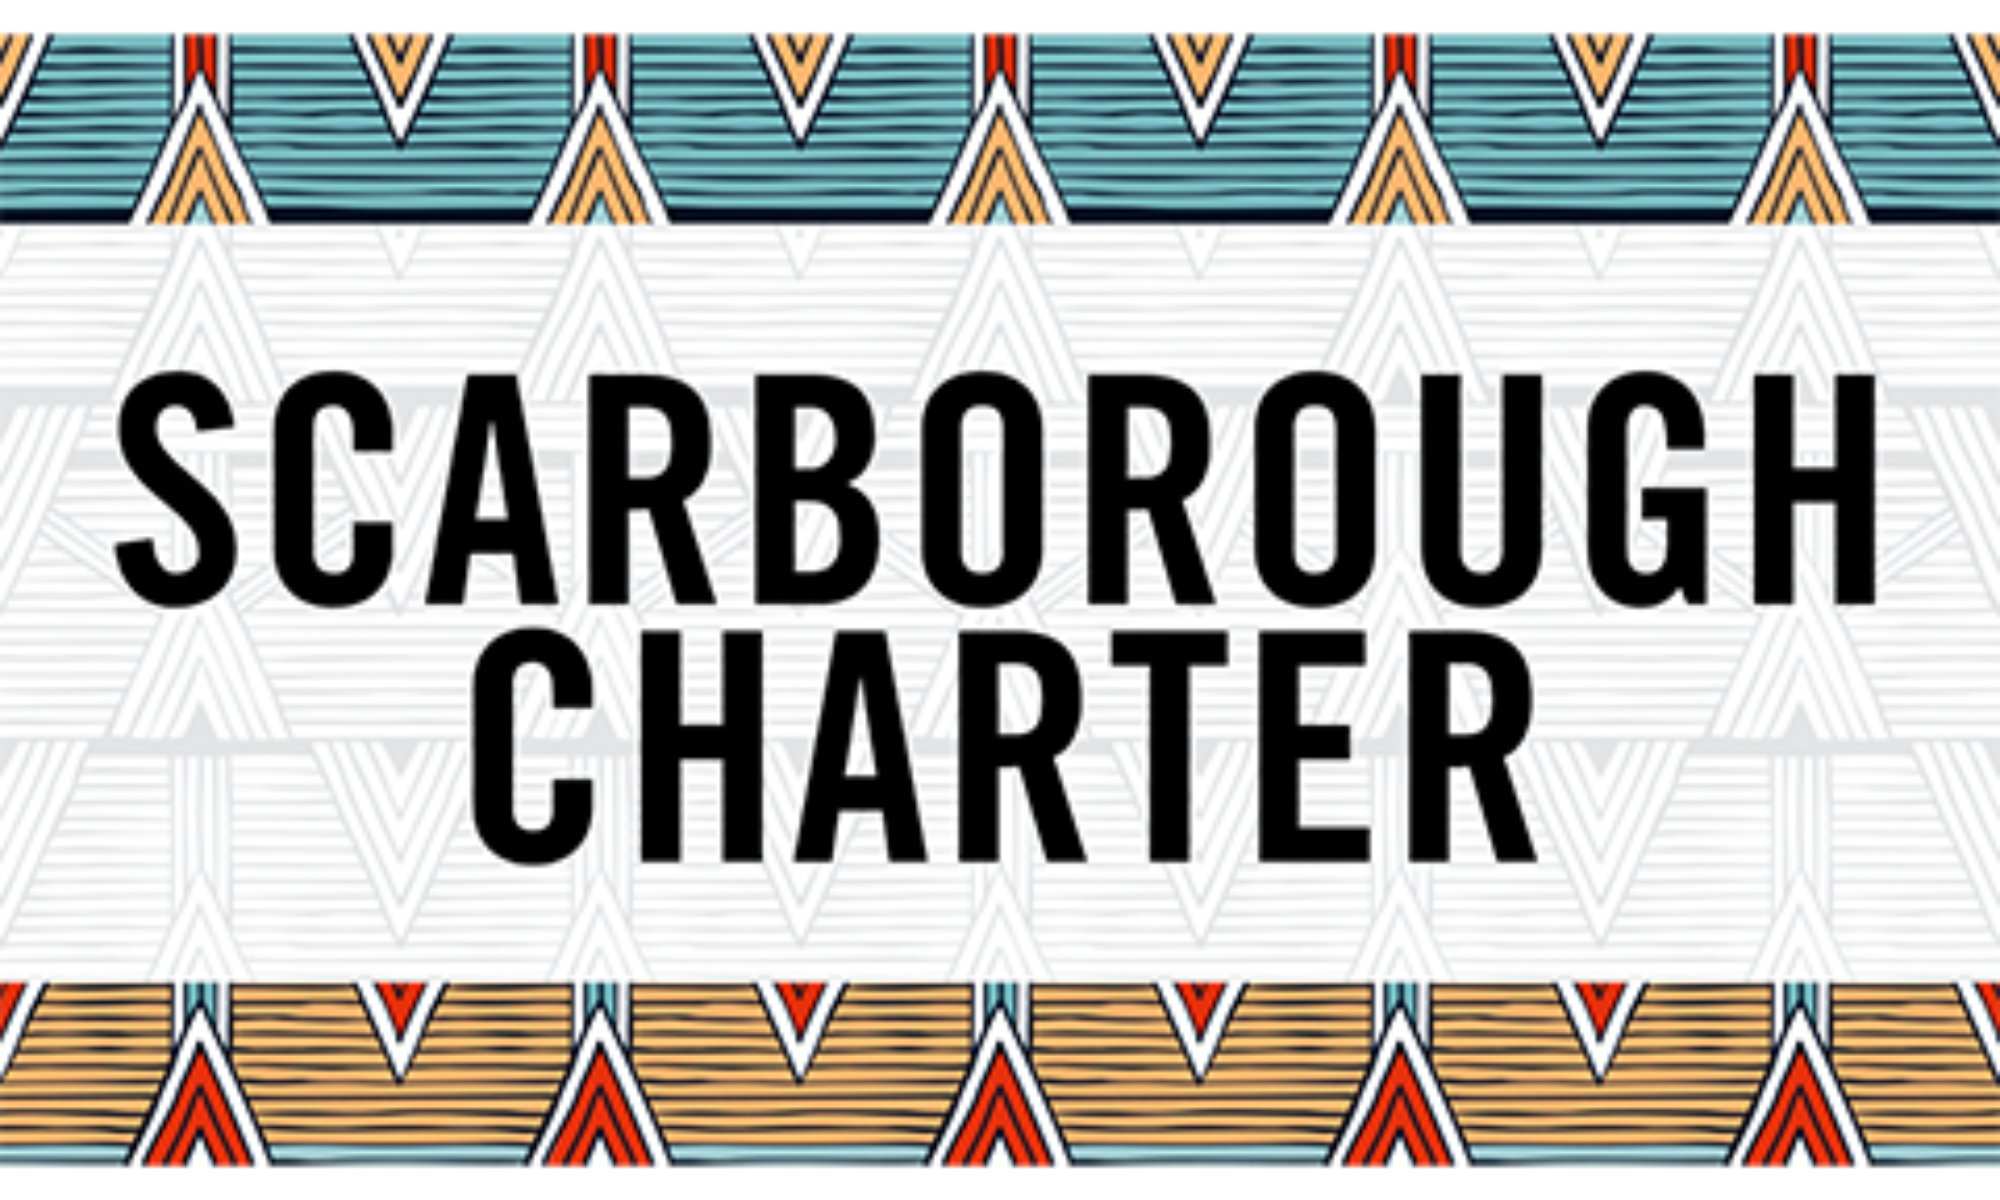 The Scarborough Charter